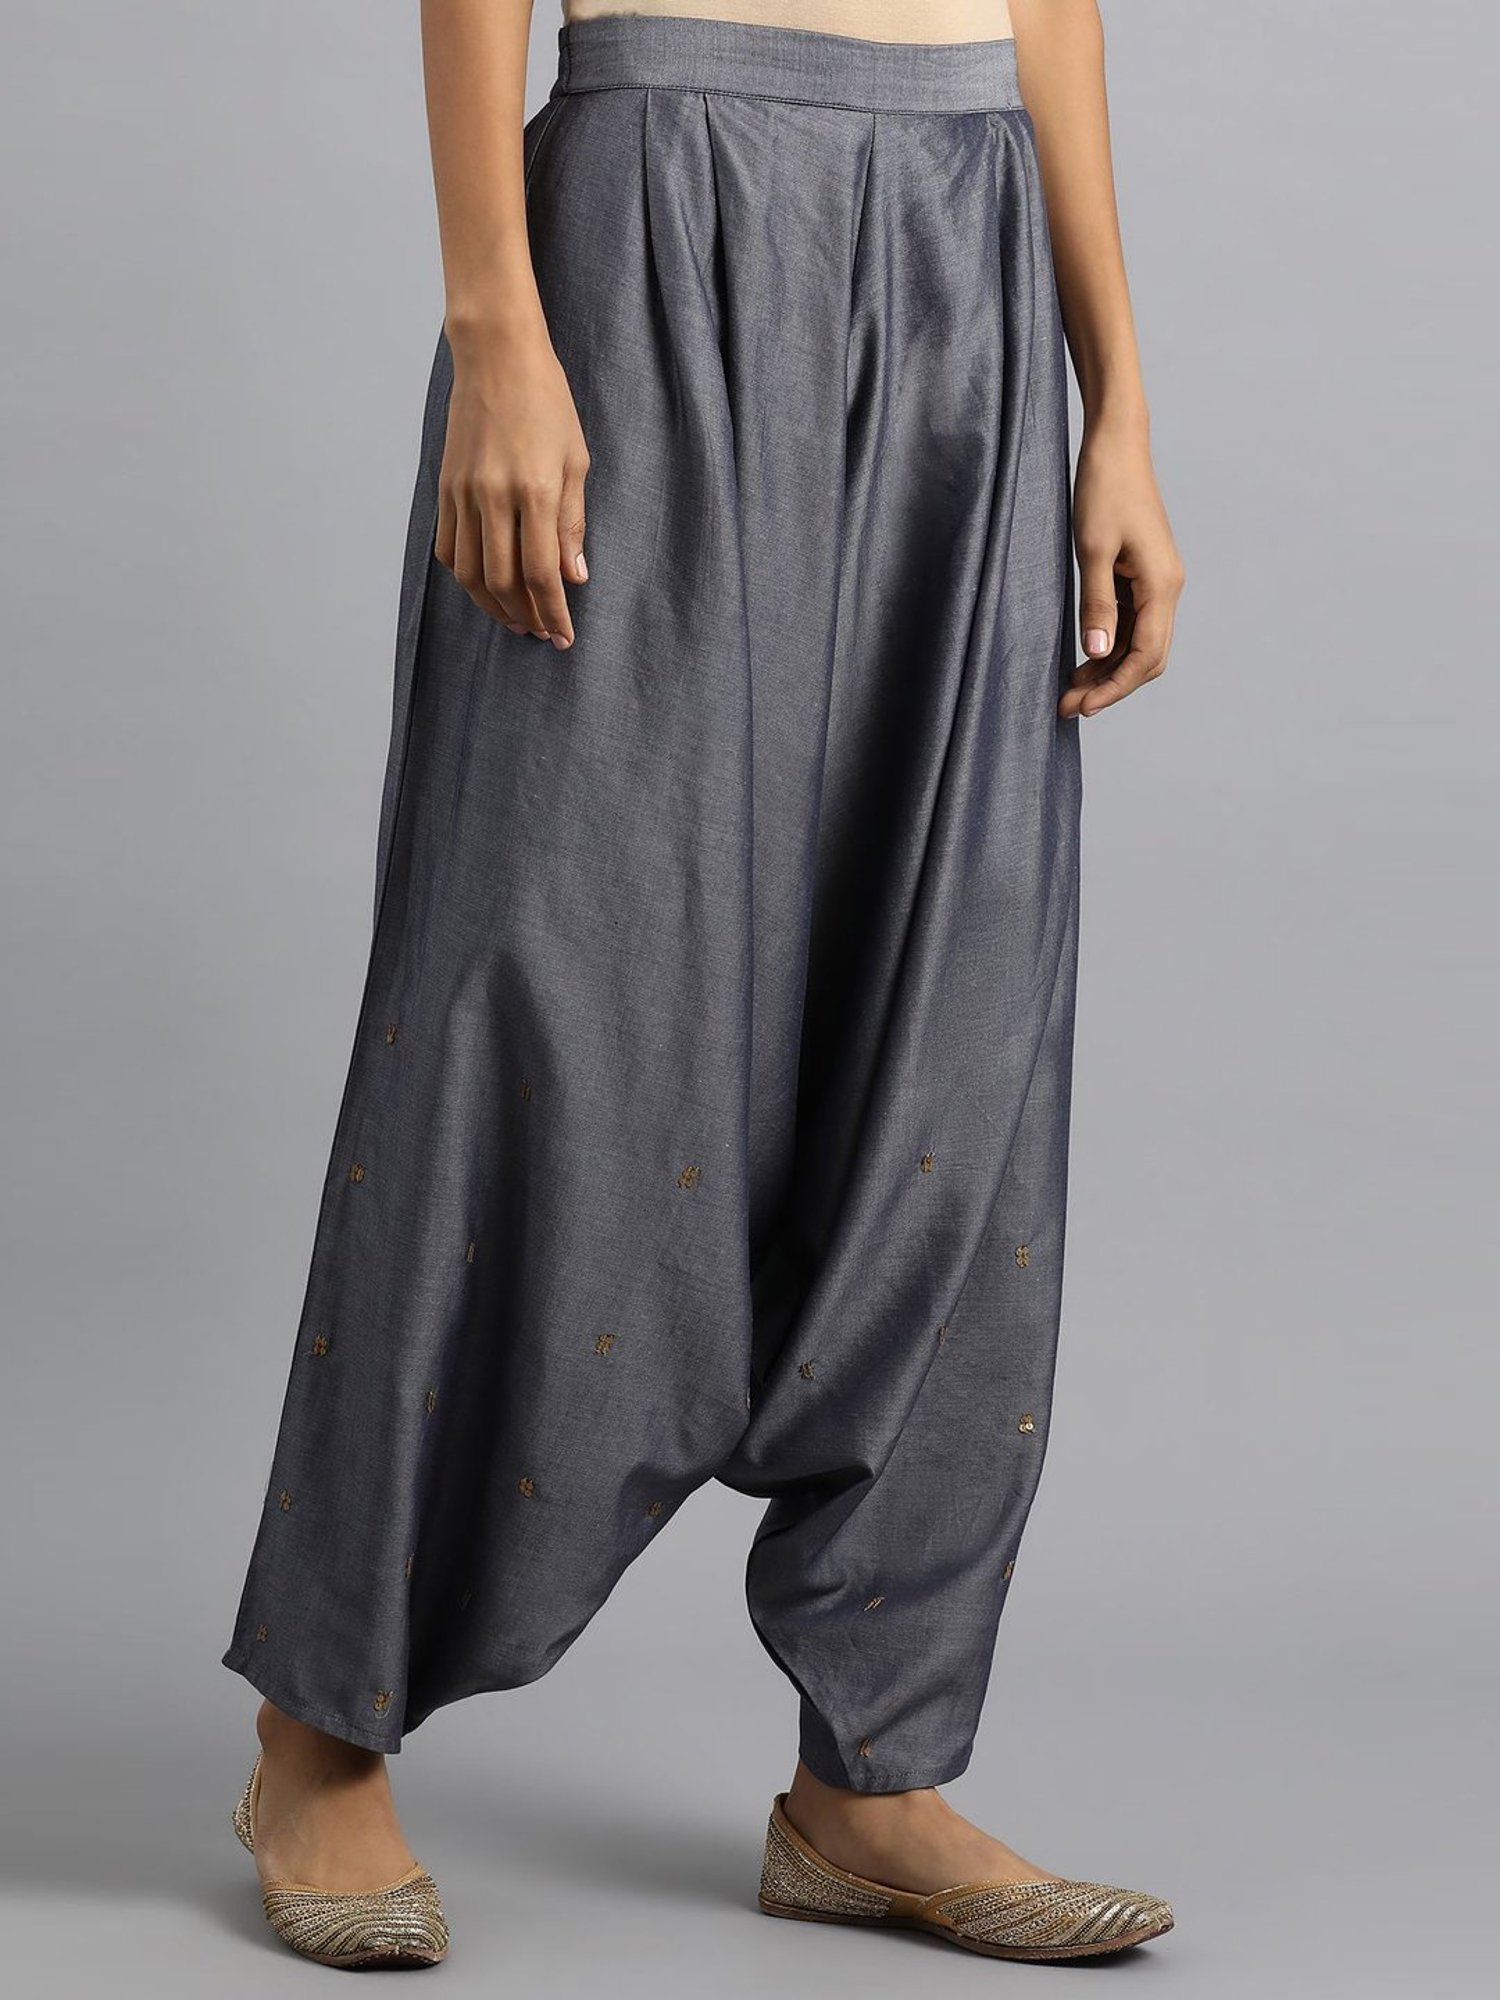 How Have Harem Pants Been in Style with Evolving Fashion Trends? – Bottle&Co